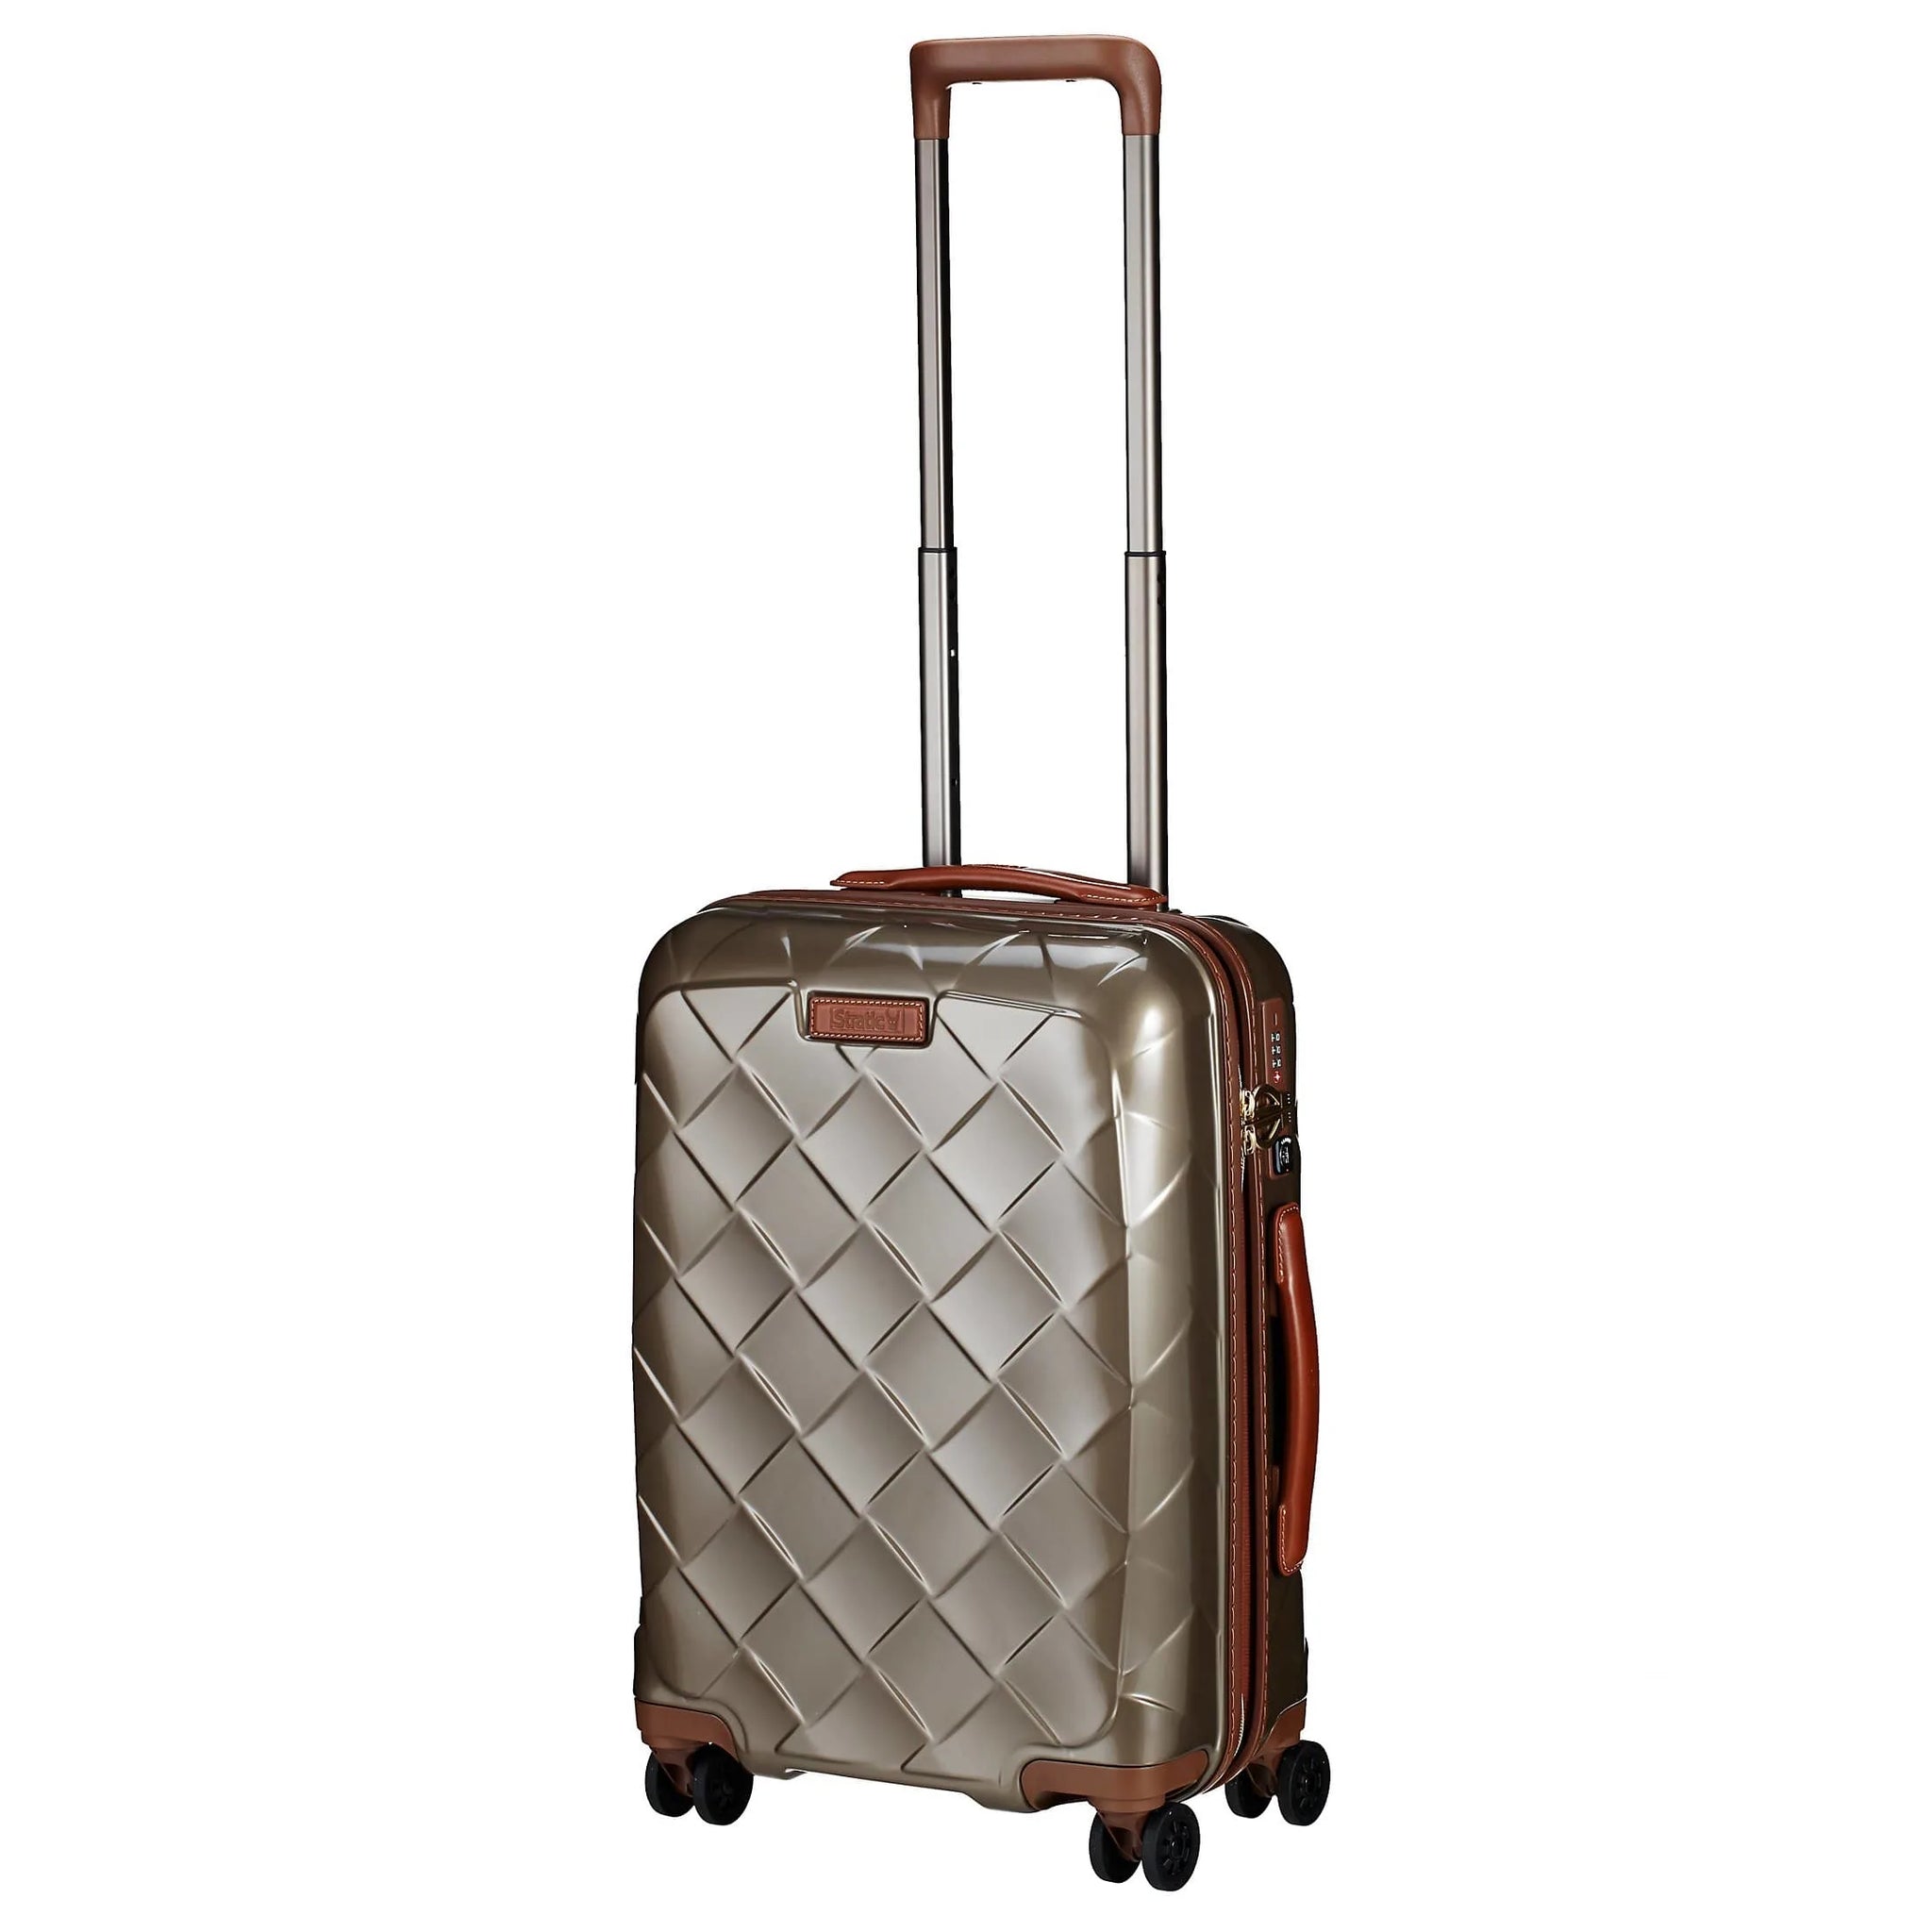 55 board champagne Leather & - More 4-wheel trolley cm Stratic